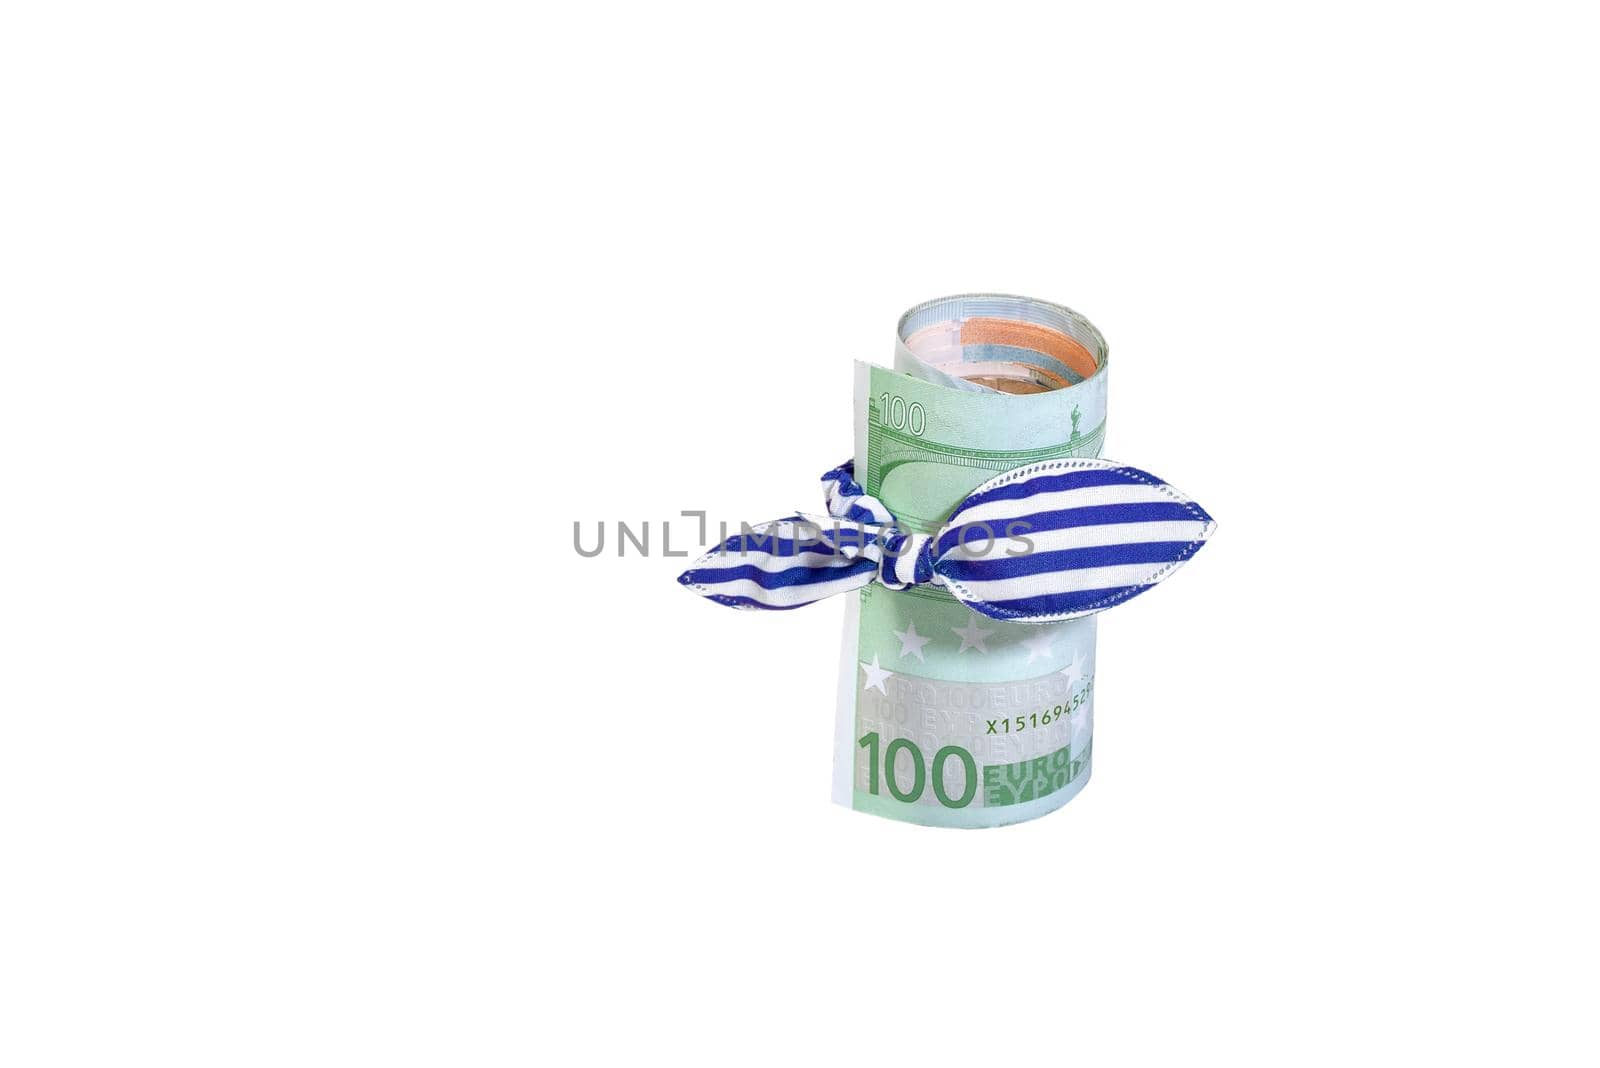 Hundred euros banknote curtailed by a tubule with blue elastic band with a bow isolated on white